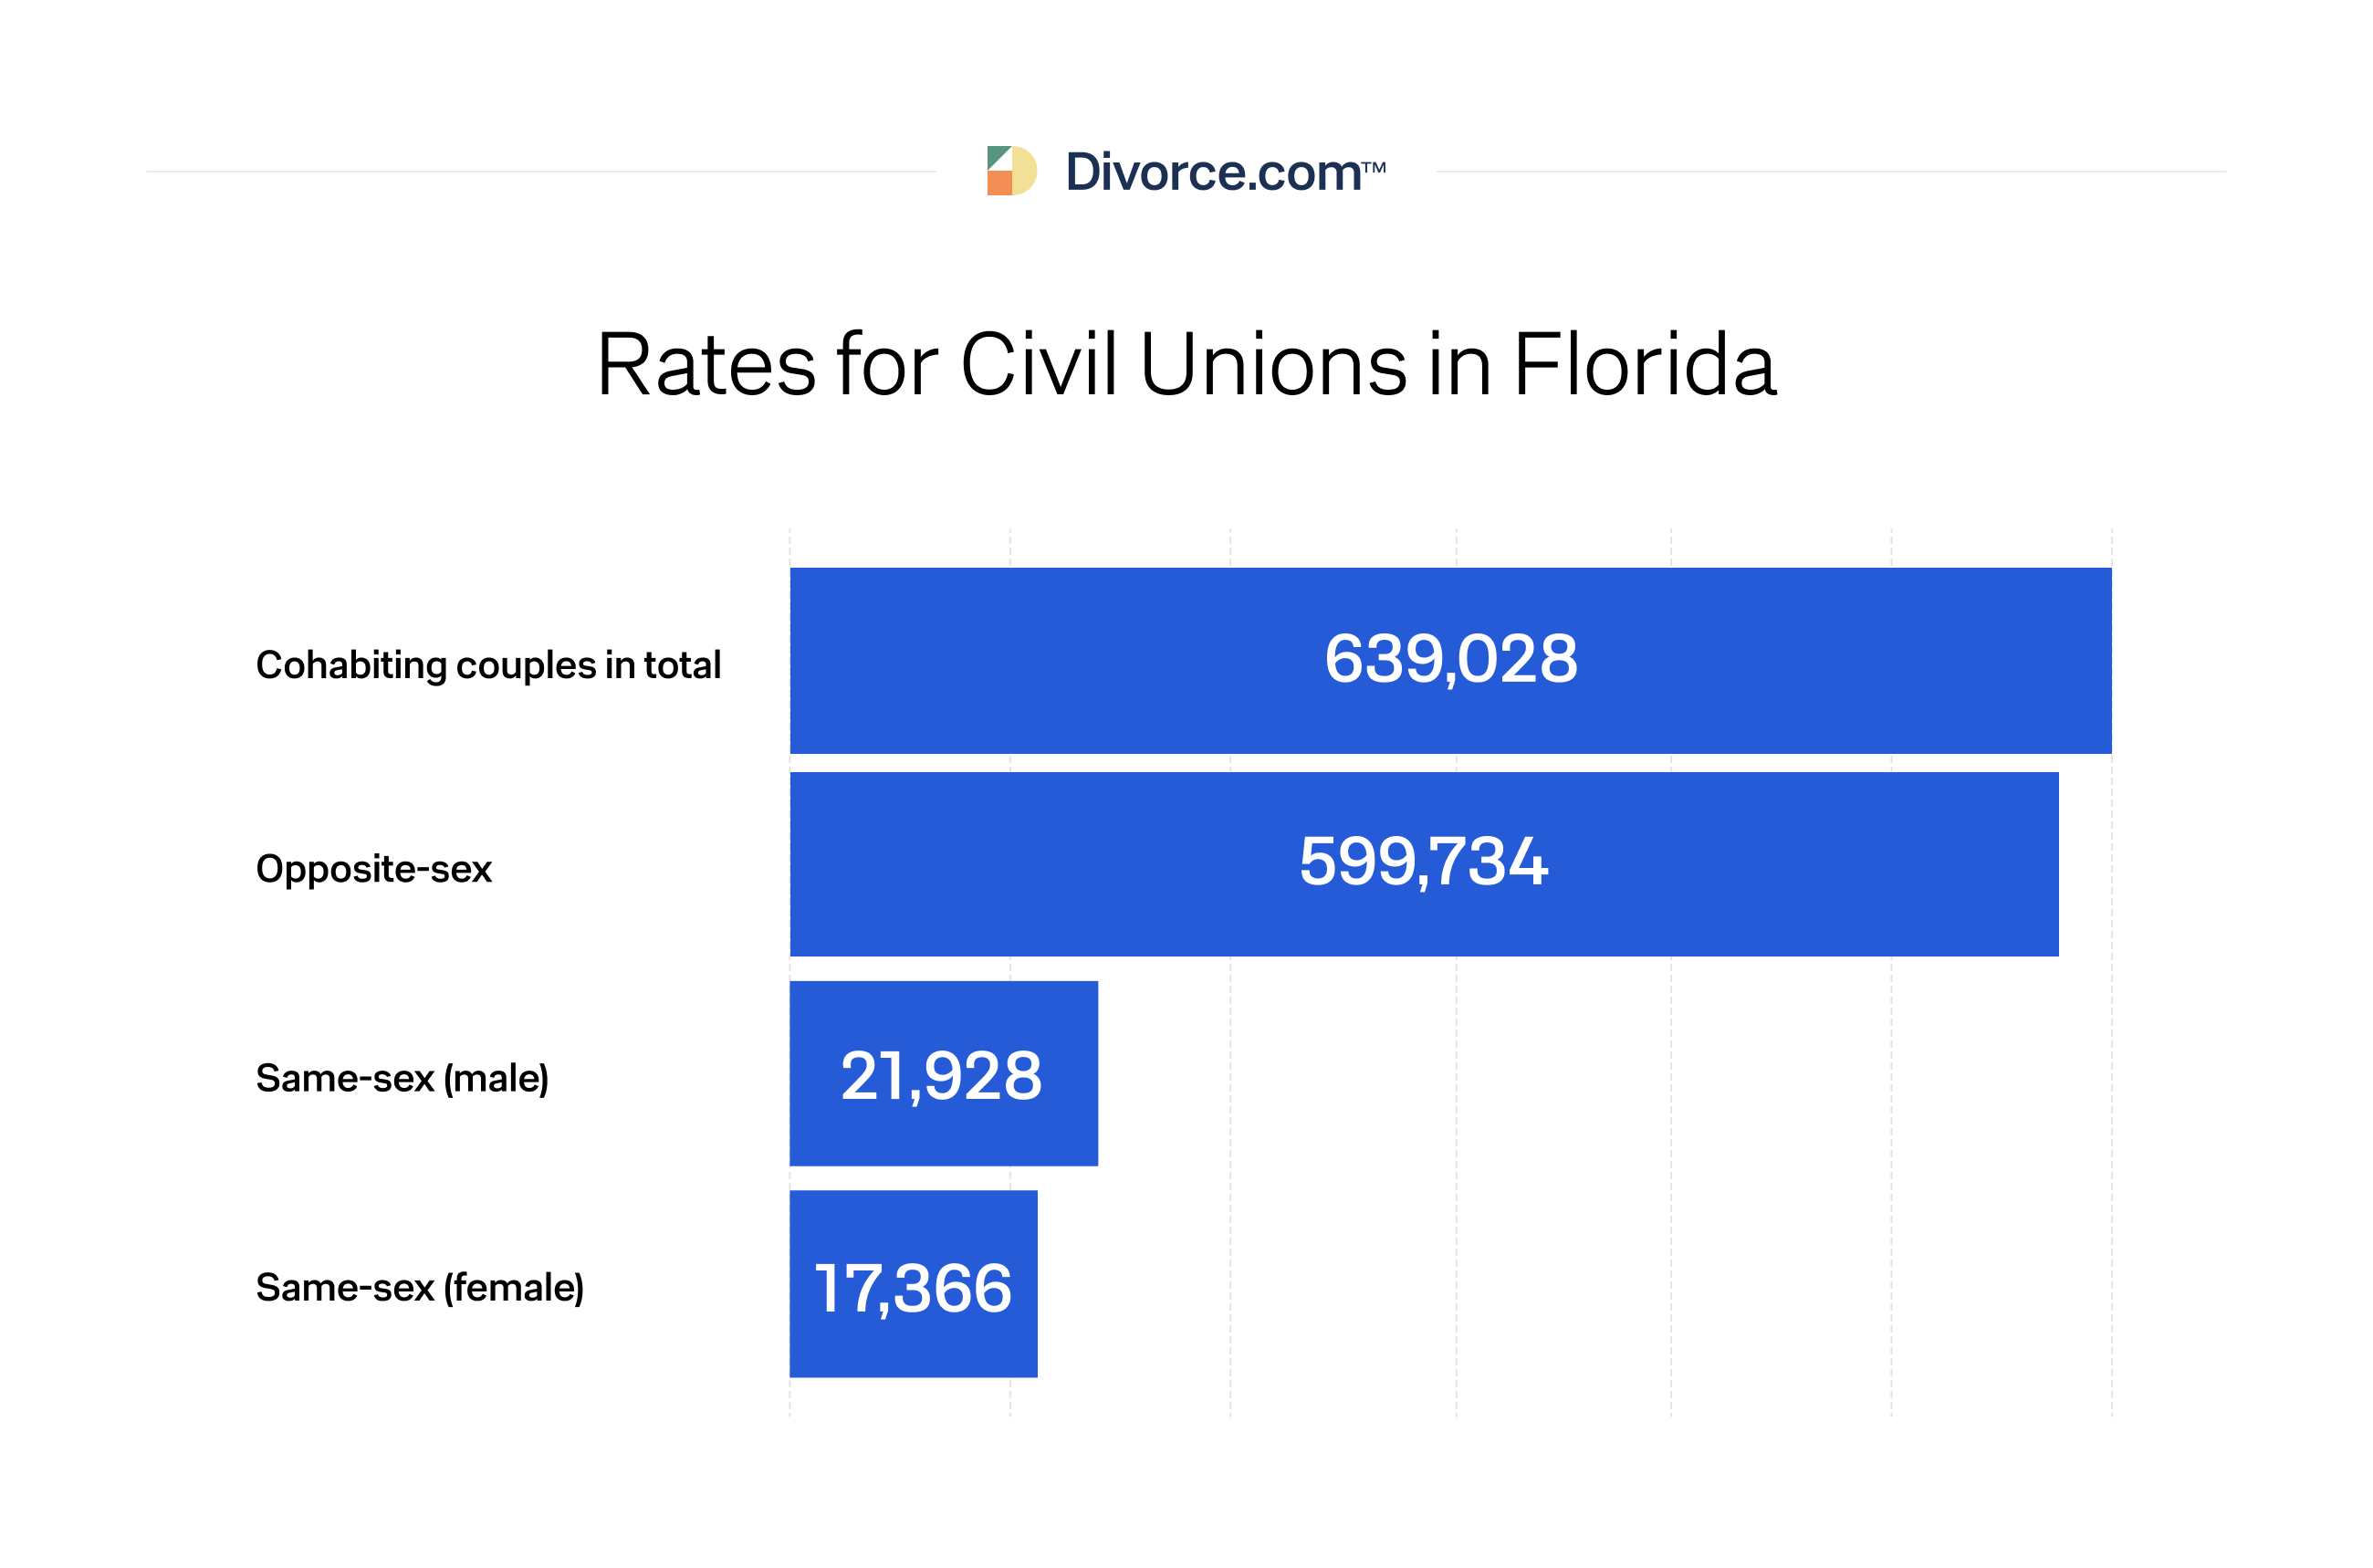 Rates for Civil Unions in Florida